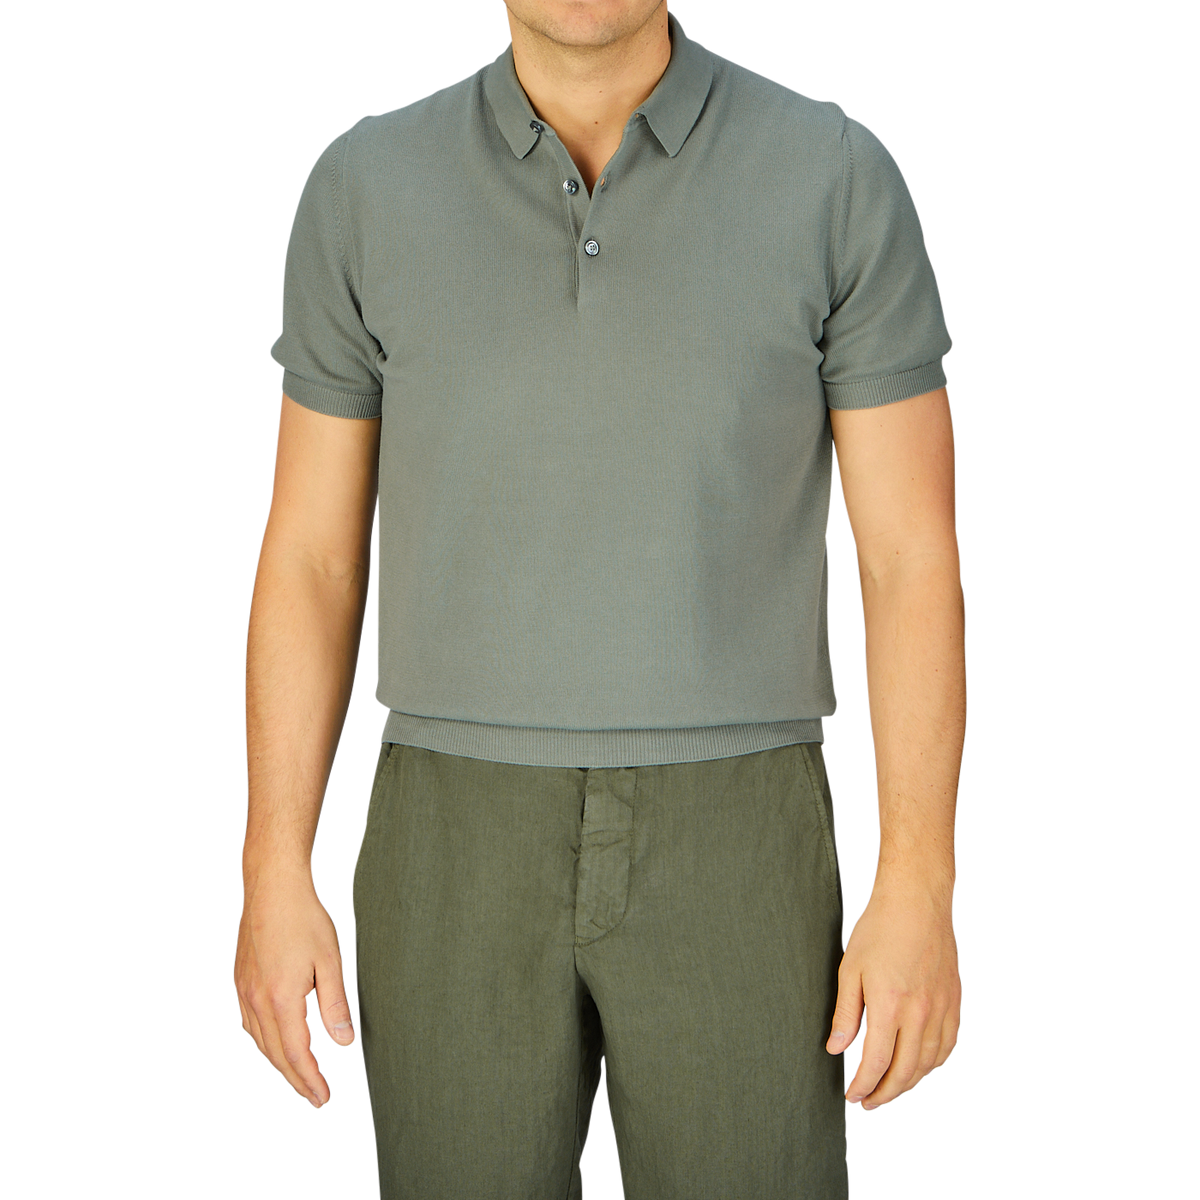 Man wearing a slim fit Mauro Ottaviani Khaki Green Supima Cotton Polo Shirt and green trousers against a gray background.